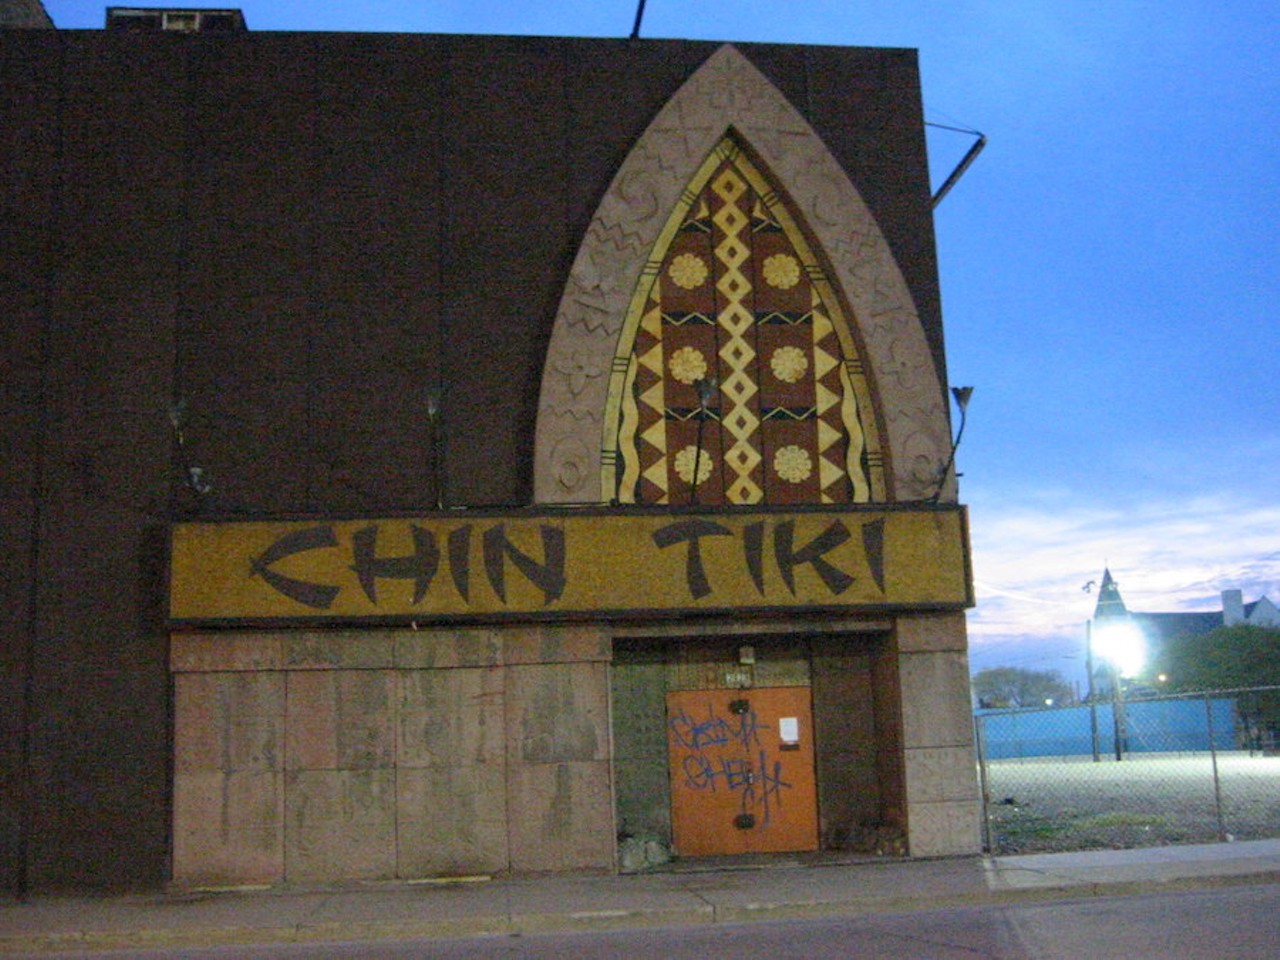 BONUS: 8 Mile (2002) 
Chin Tiki/Parking lot
2121 Cass Ave., Detroit
While you may not be able to visit Chin Tiki, the once-hot tiki-themed nightclub and restaurant which was featured in 8 Mile, you can park on it, thanks to our favorite purveyors of parking lots, the Illitch family! That's right, Chin Tiki was torn down in 2009, nearly three decades after it shuttered. R.I.P. Chin Tiki, may you live on forever in our hearts and in 8 Mile. 
Photo by Jim Reese/Flickr